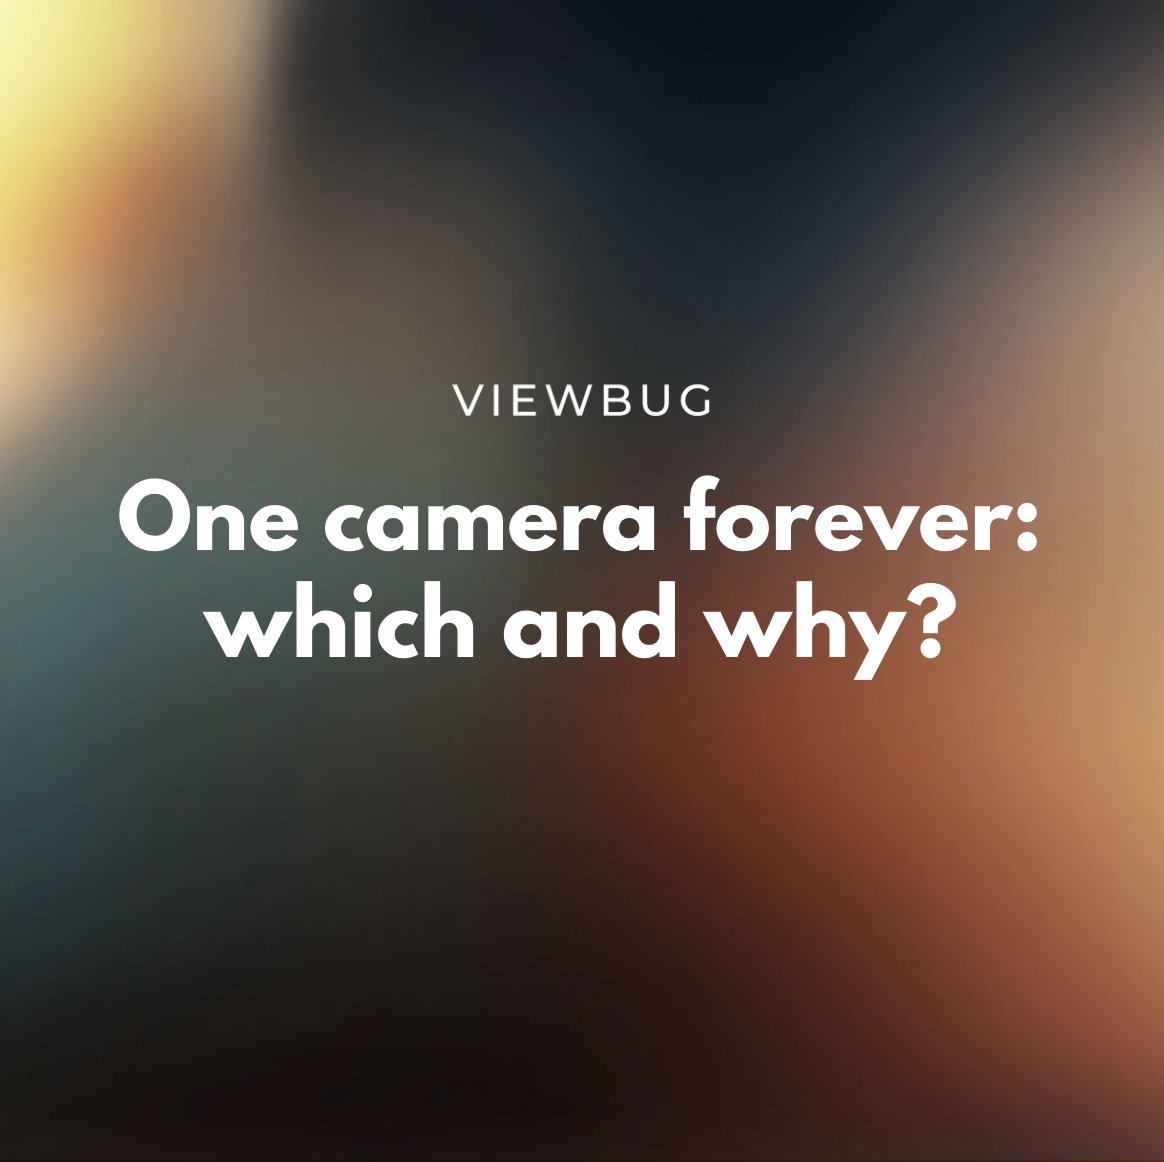 One camera forever: which and why? Join the conversation 👇